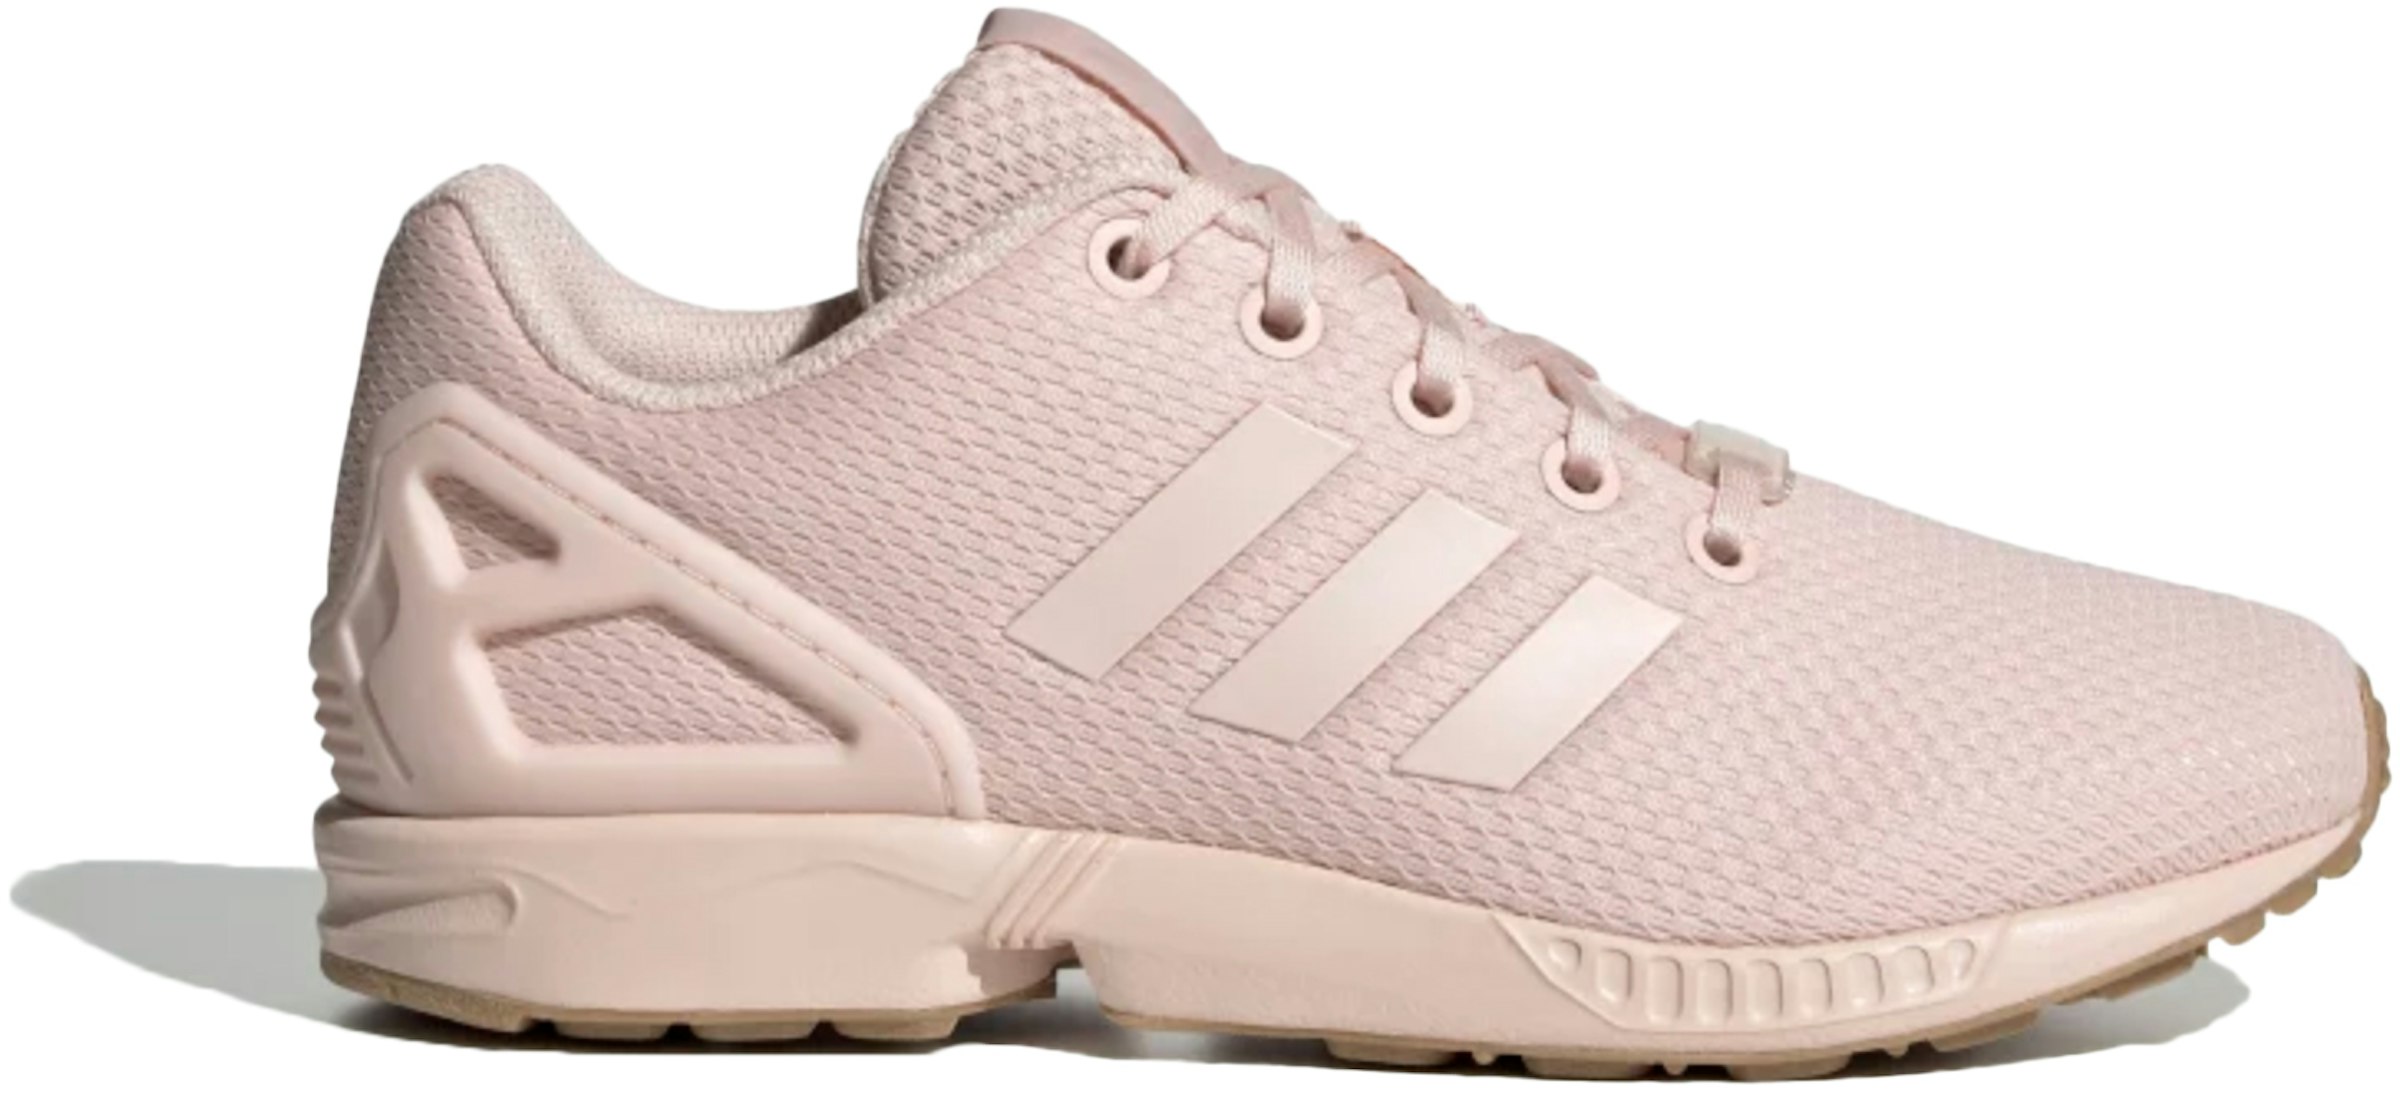 adidas ZX Flux Triple Icey Pink Kids' - EH3174 - US